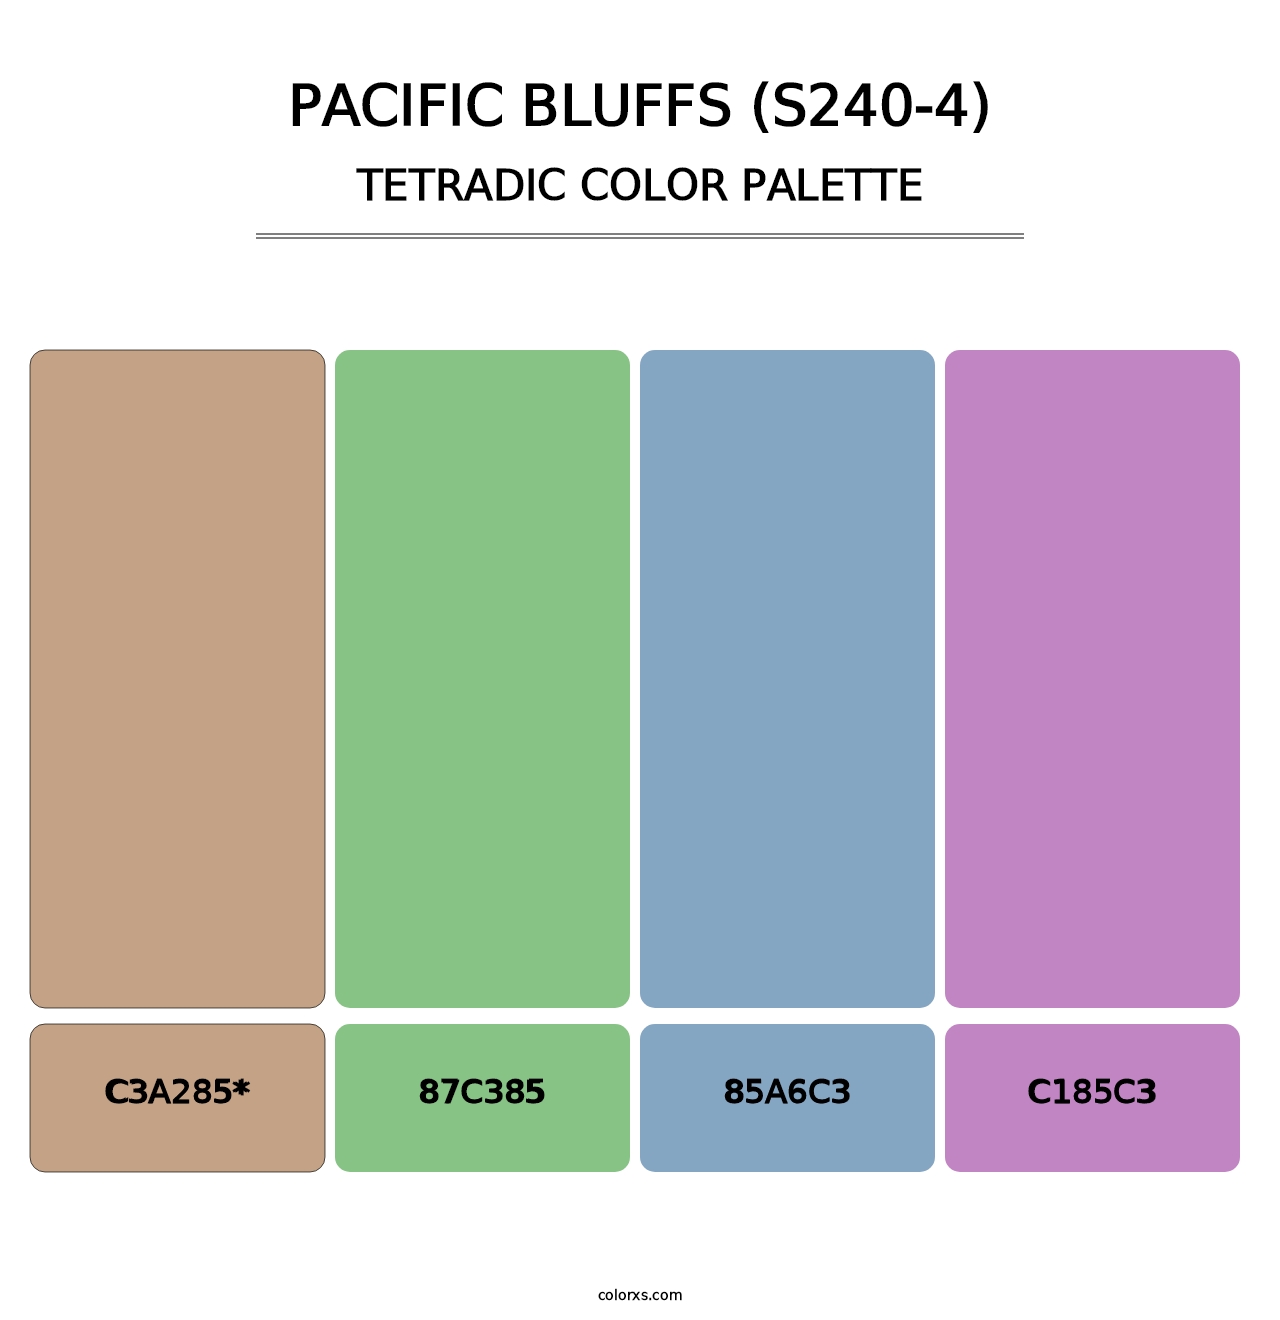 Pacific Bluffs (S240-4) - Tetradic Color Palette